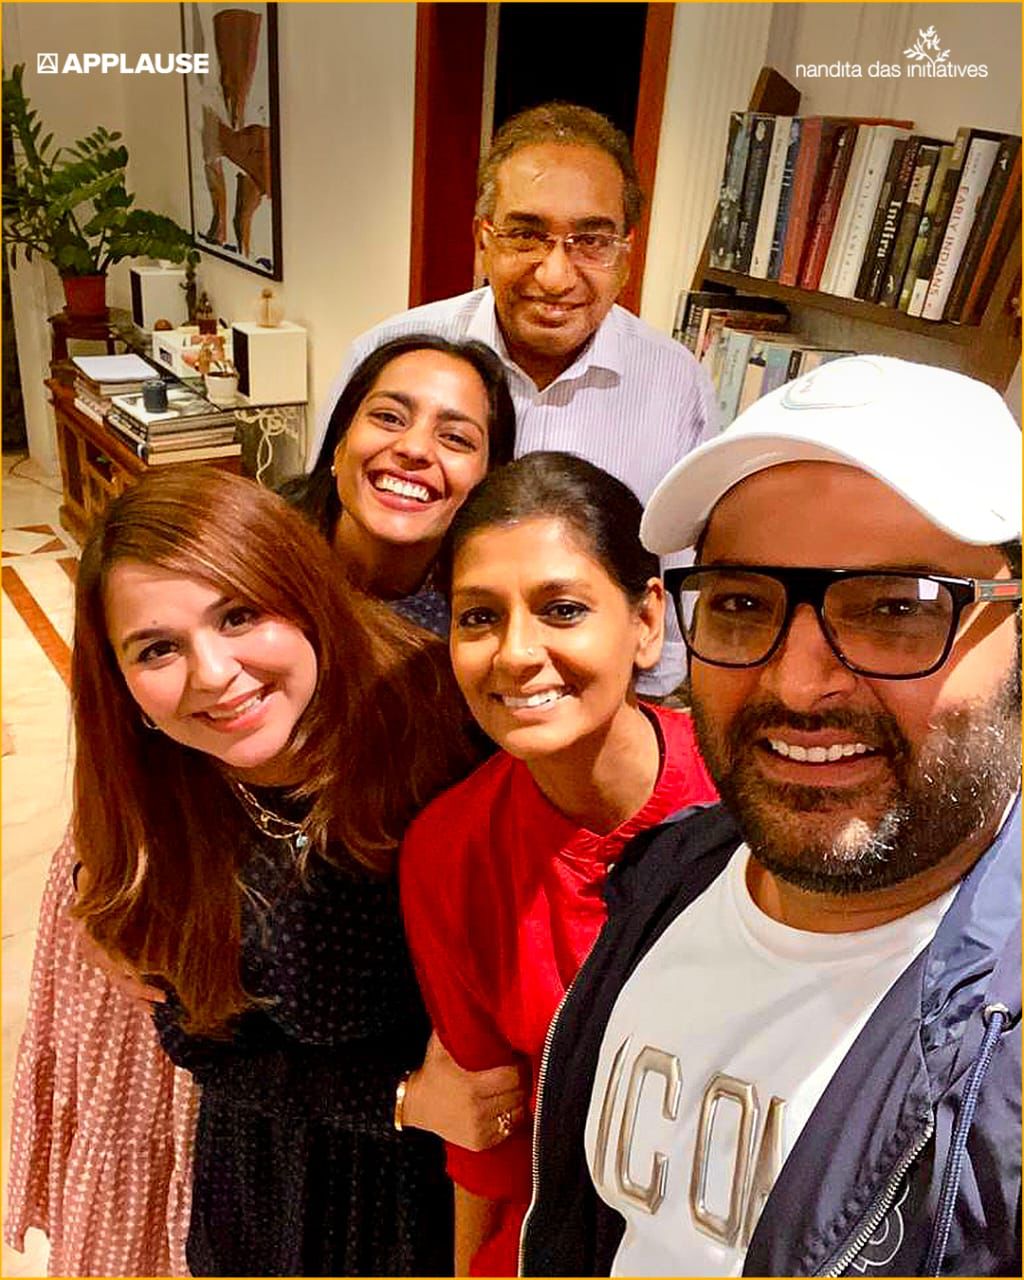 Kapil Sharma To Play a Food Delivery Rider In Nandita Das' Next